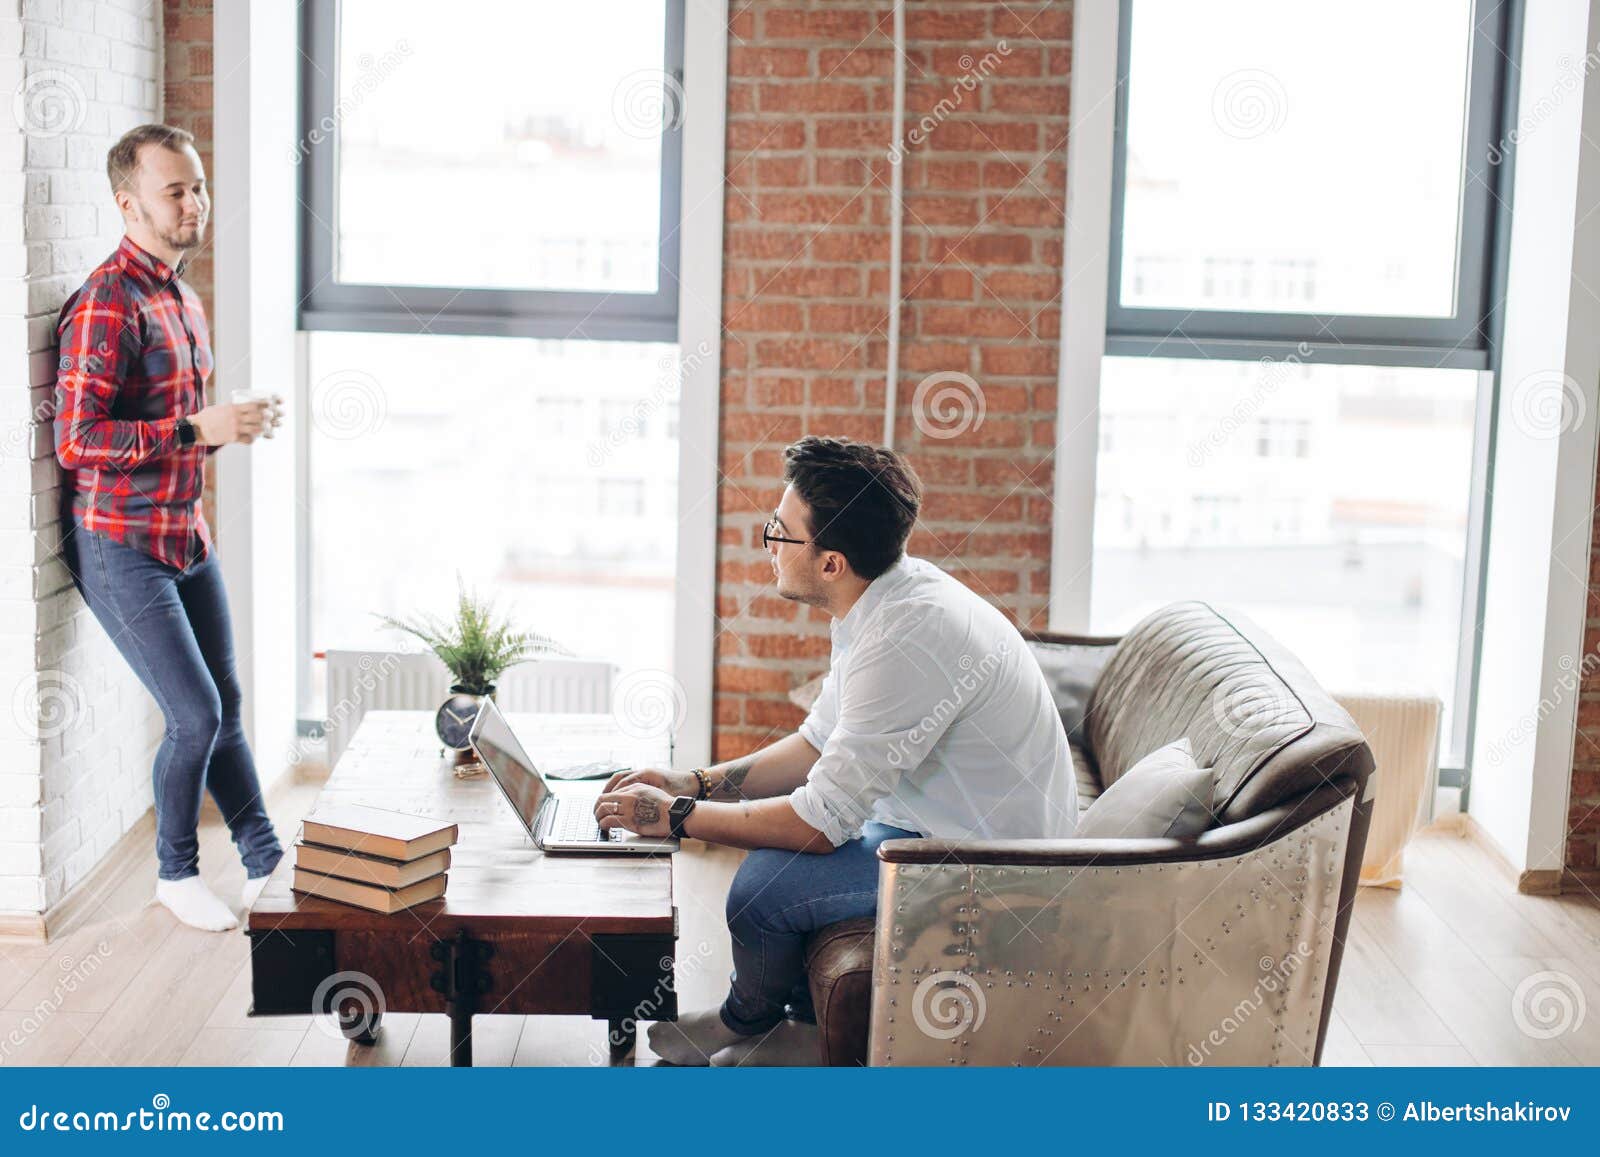 Homosexual Partners Working at Office Desk, Relationships and Business Concept Stock Image